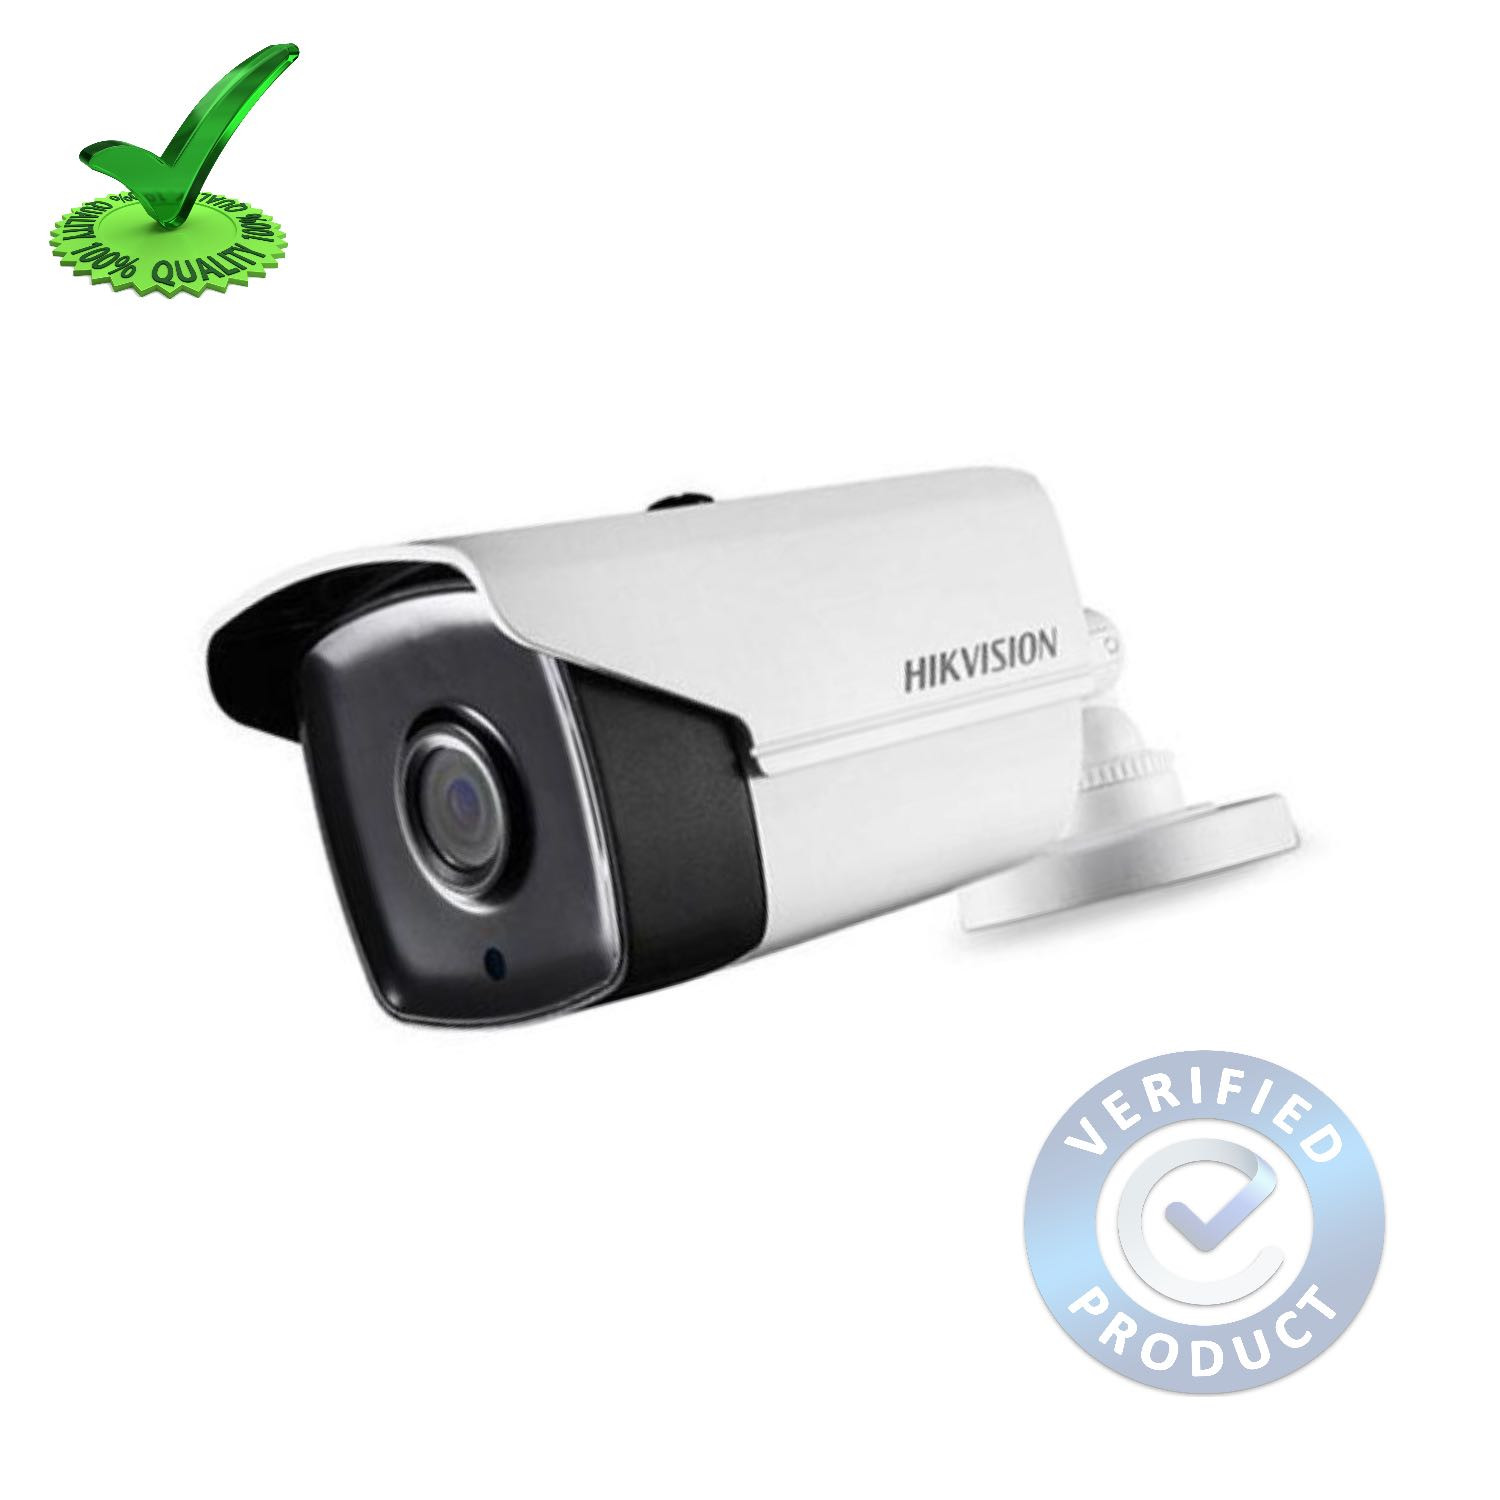 Hikvision DS-2CE1AD0T-IT1F 2MP HD Bullet Camera